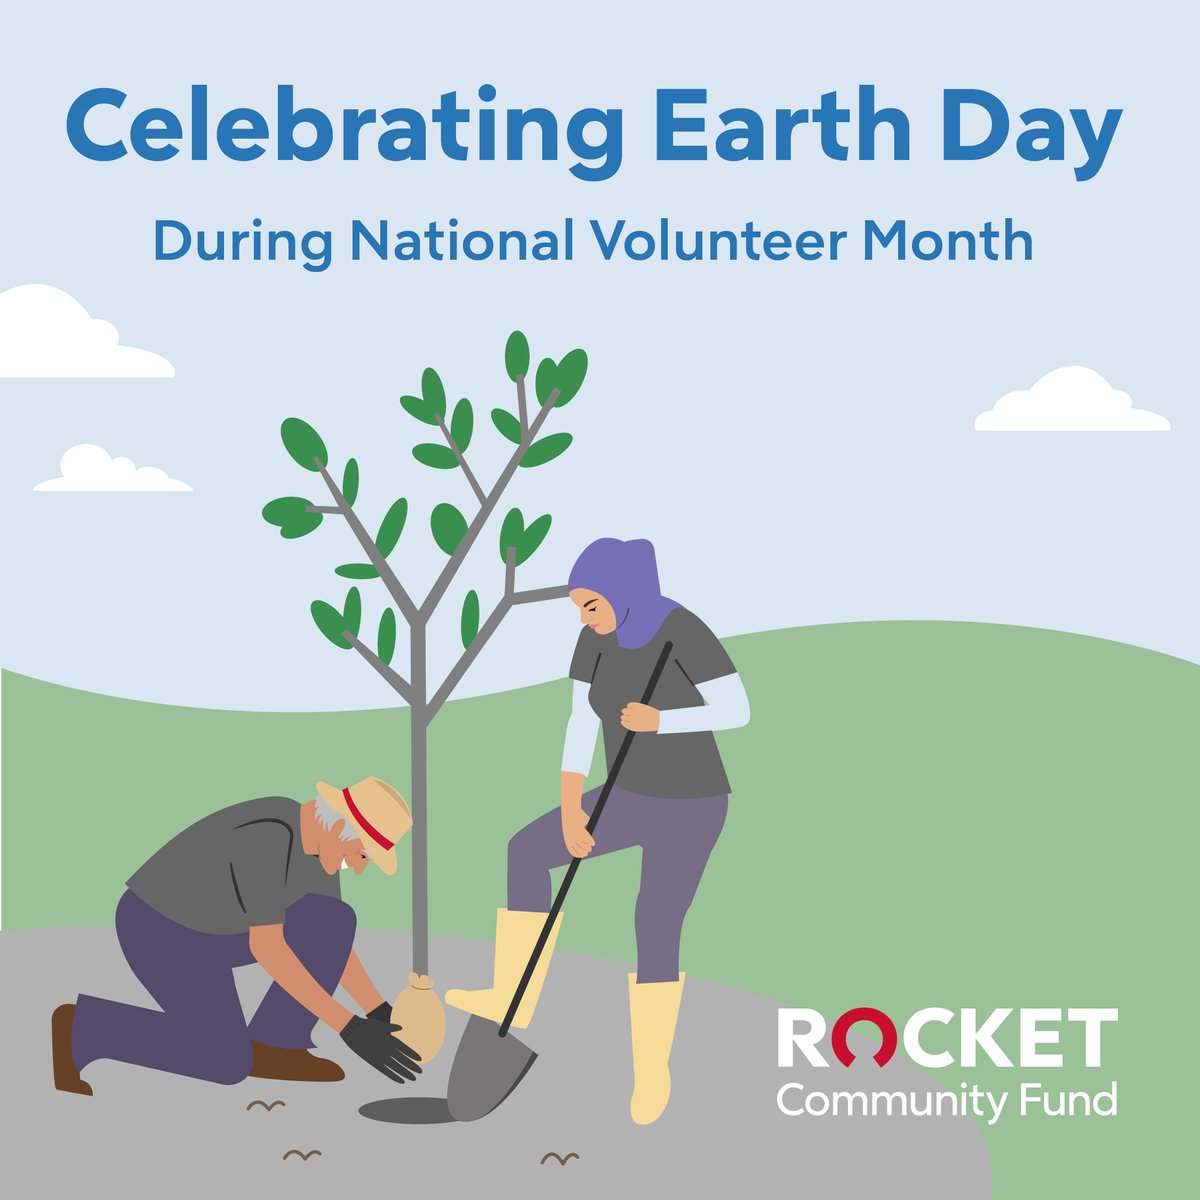 Thanks to our @rocketcompanies team members for #volunteering on #EarthDay and every day to help us create a greener planet!